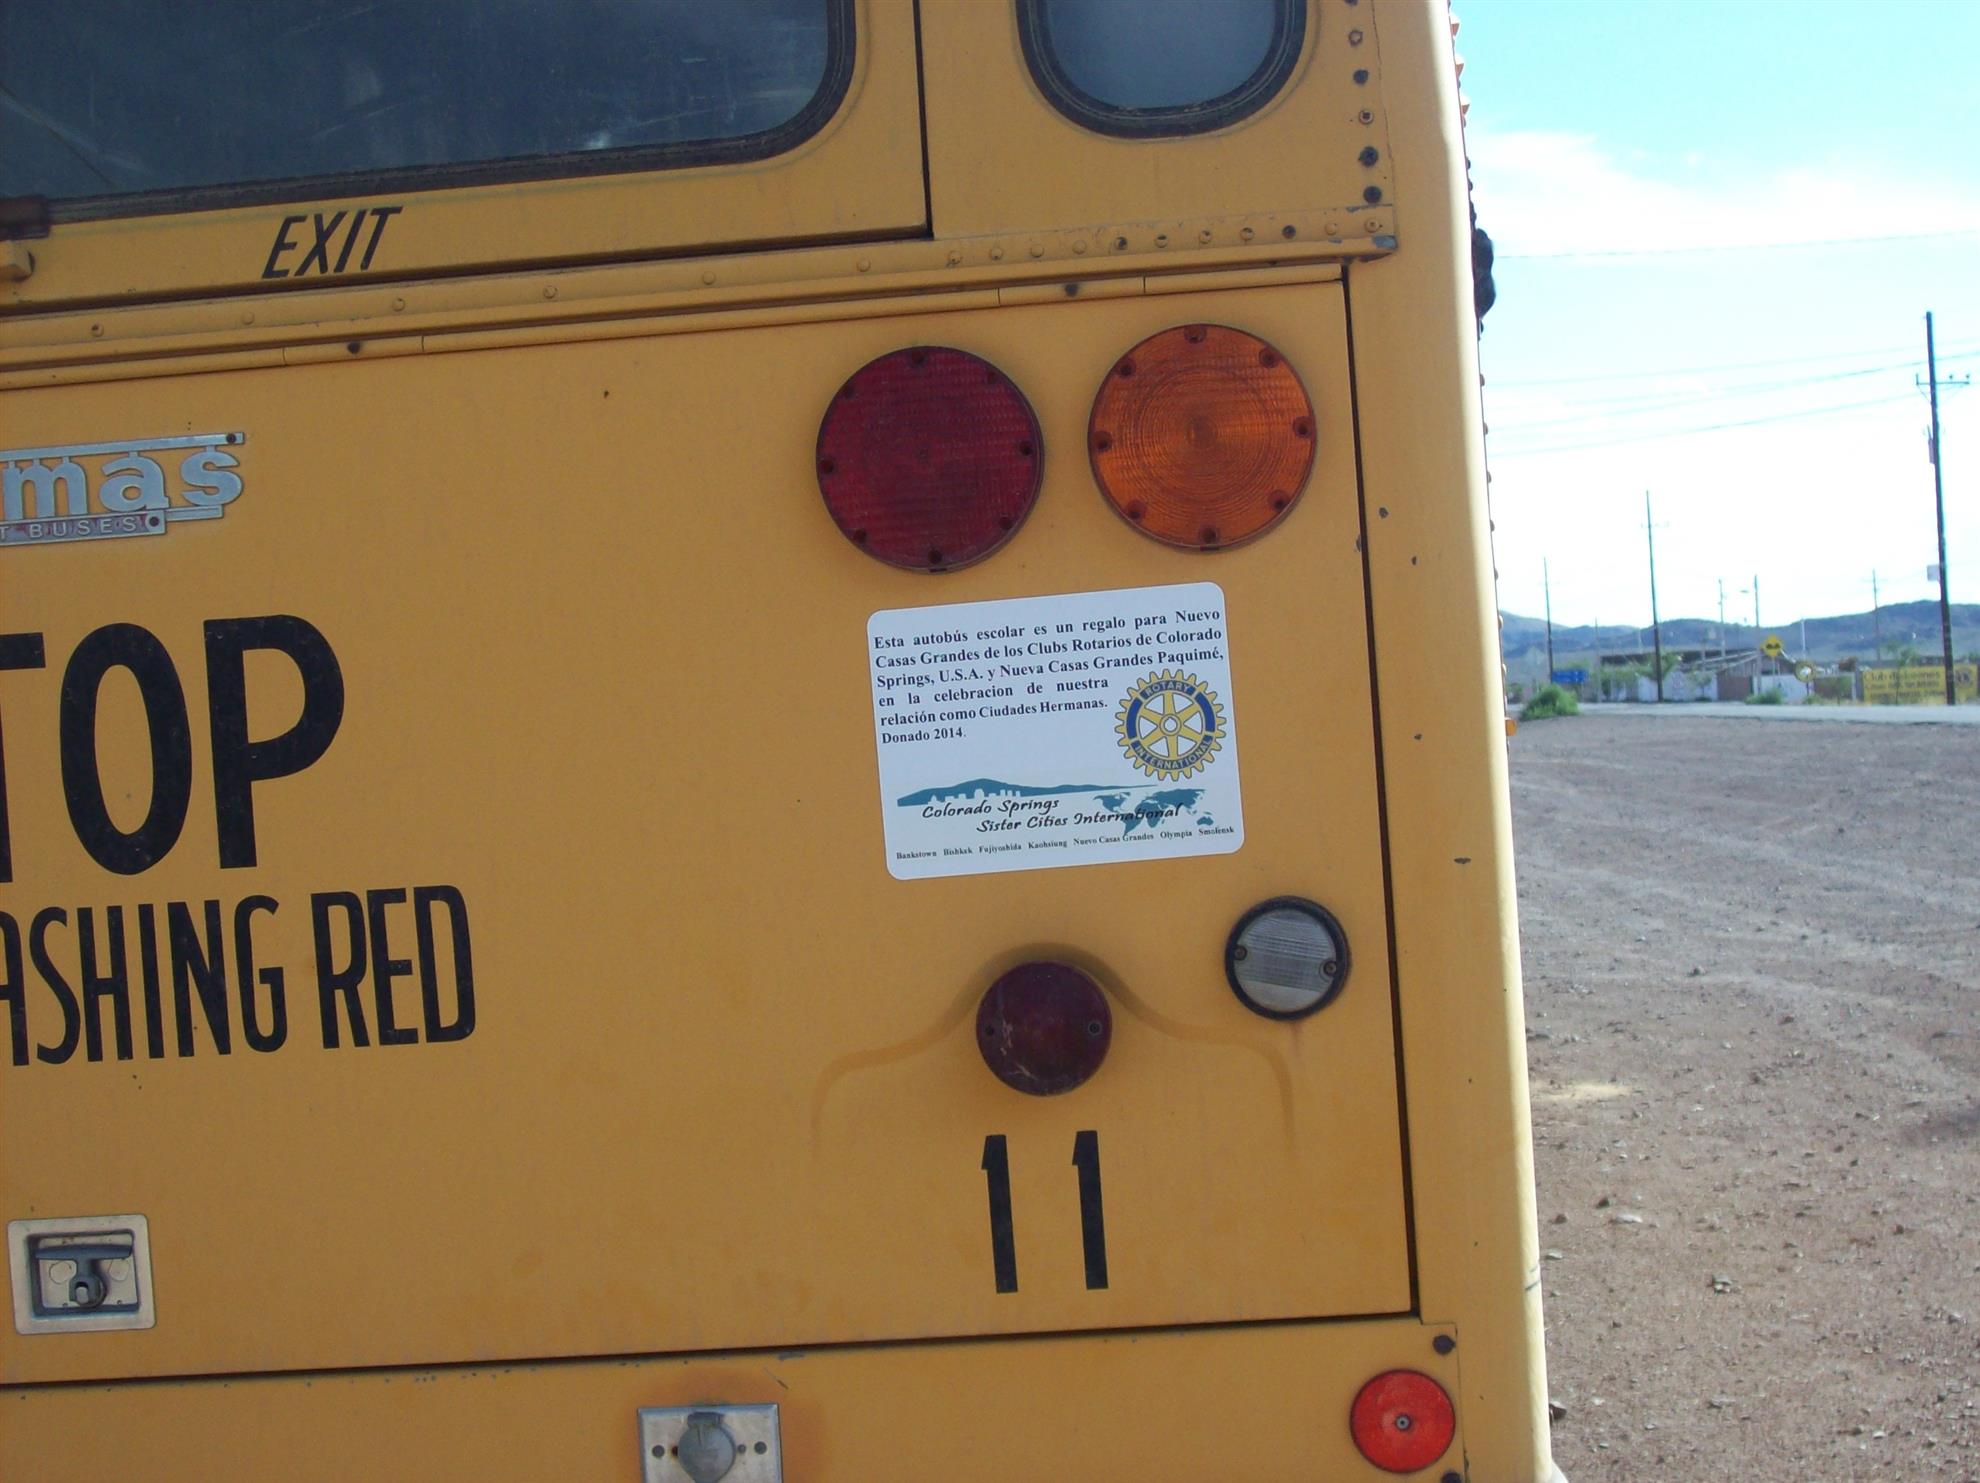 School Busses Arrive in Mexico! | Rotary Club of Colorado Springs